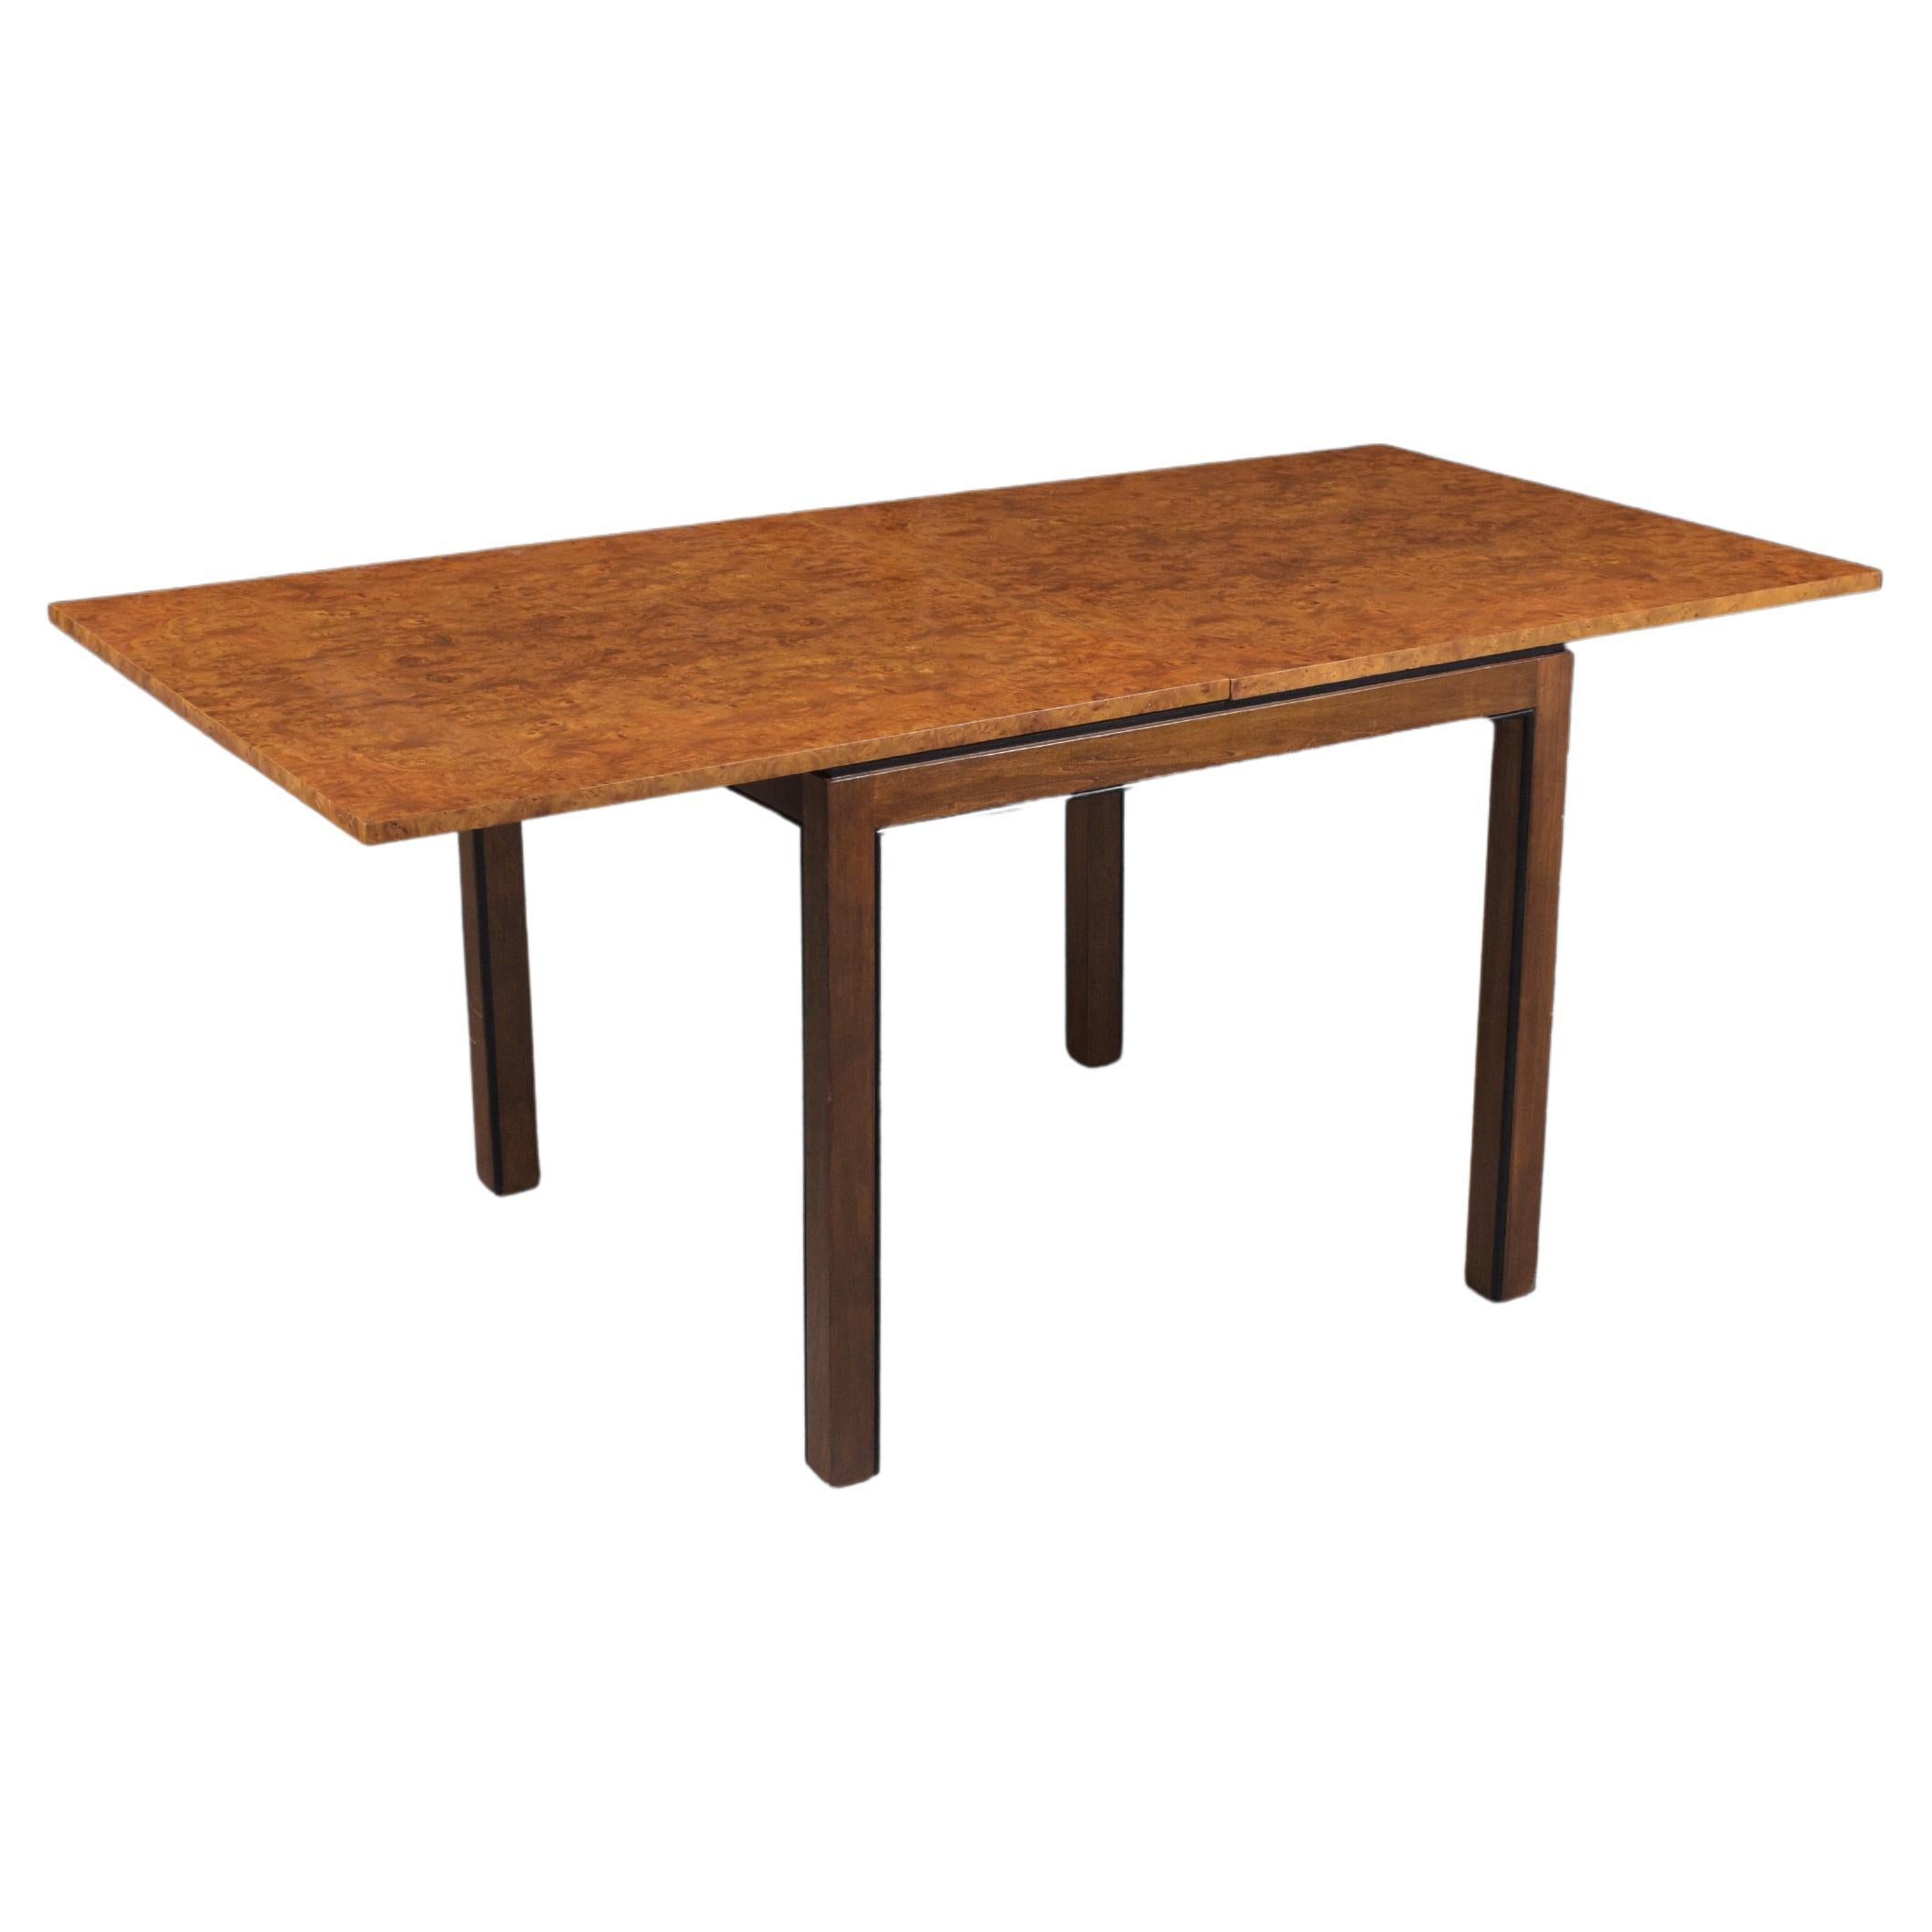 Revived Mid-Century Modern Extendable Dining Table: Elegance & Versatility